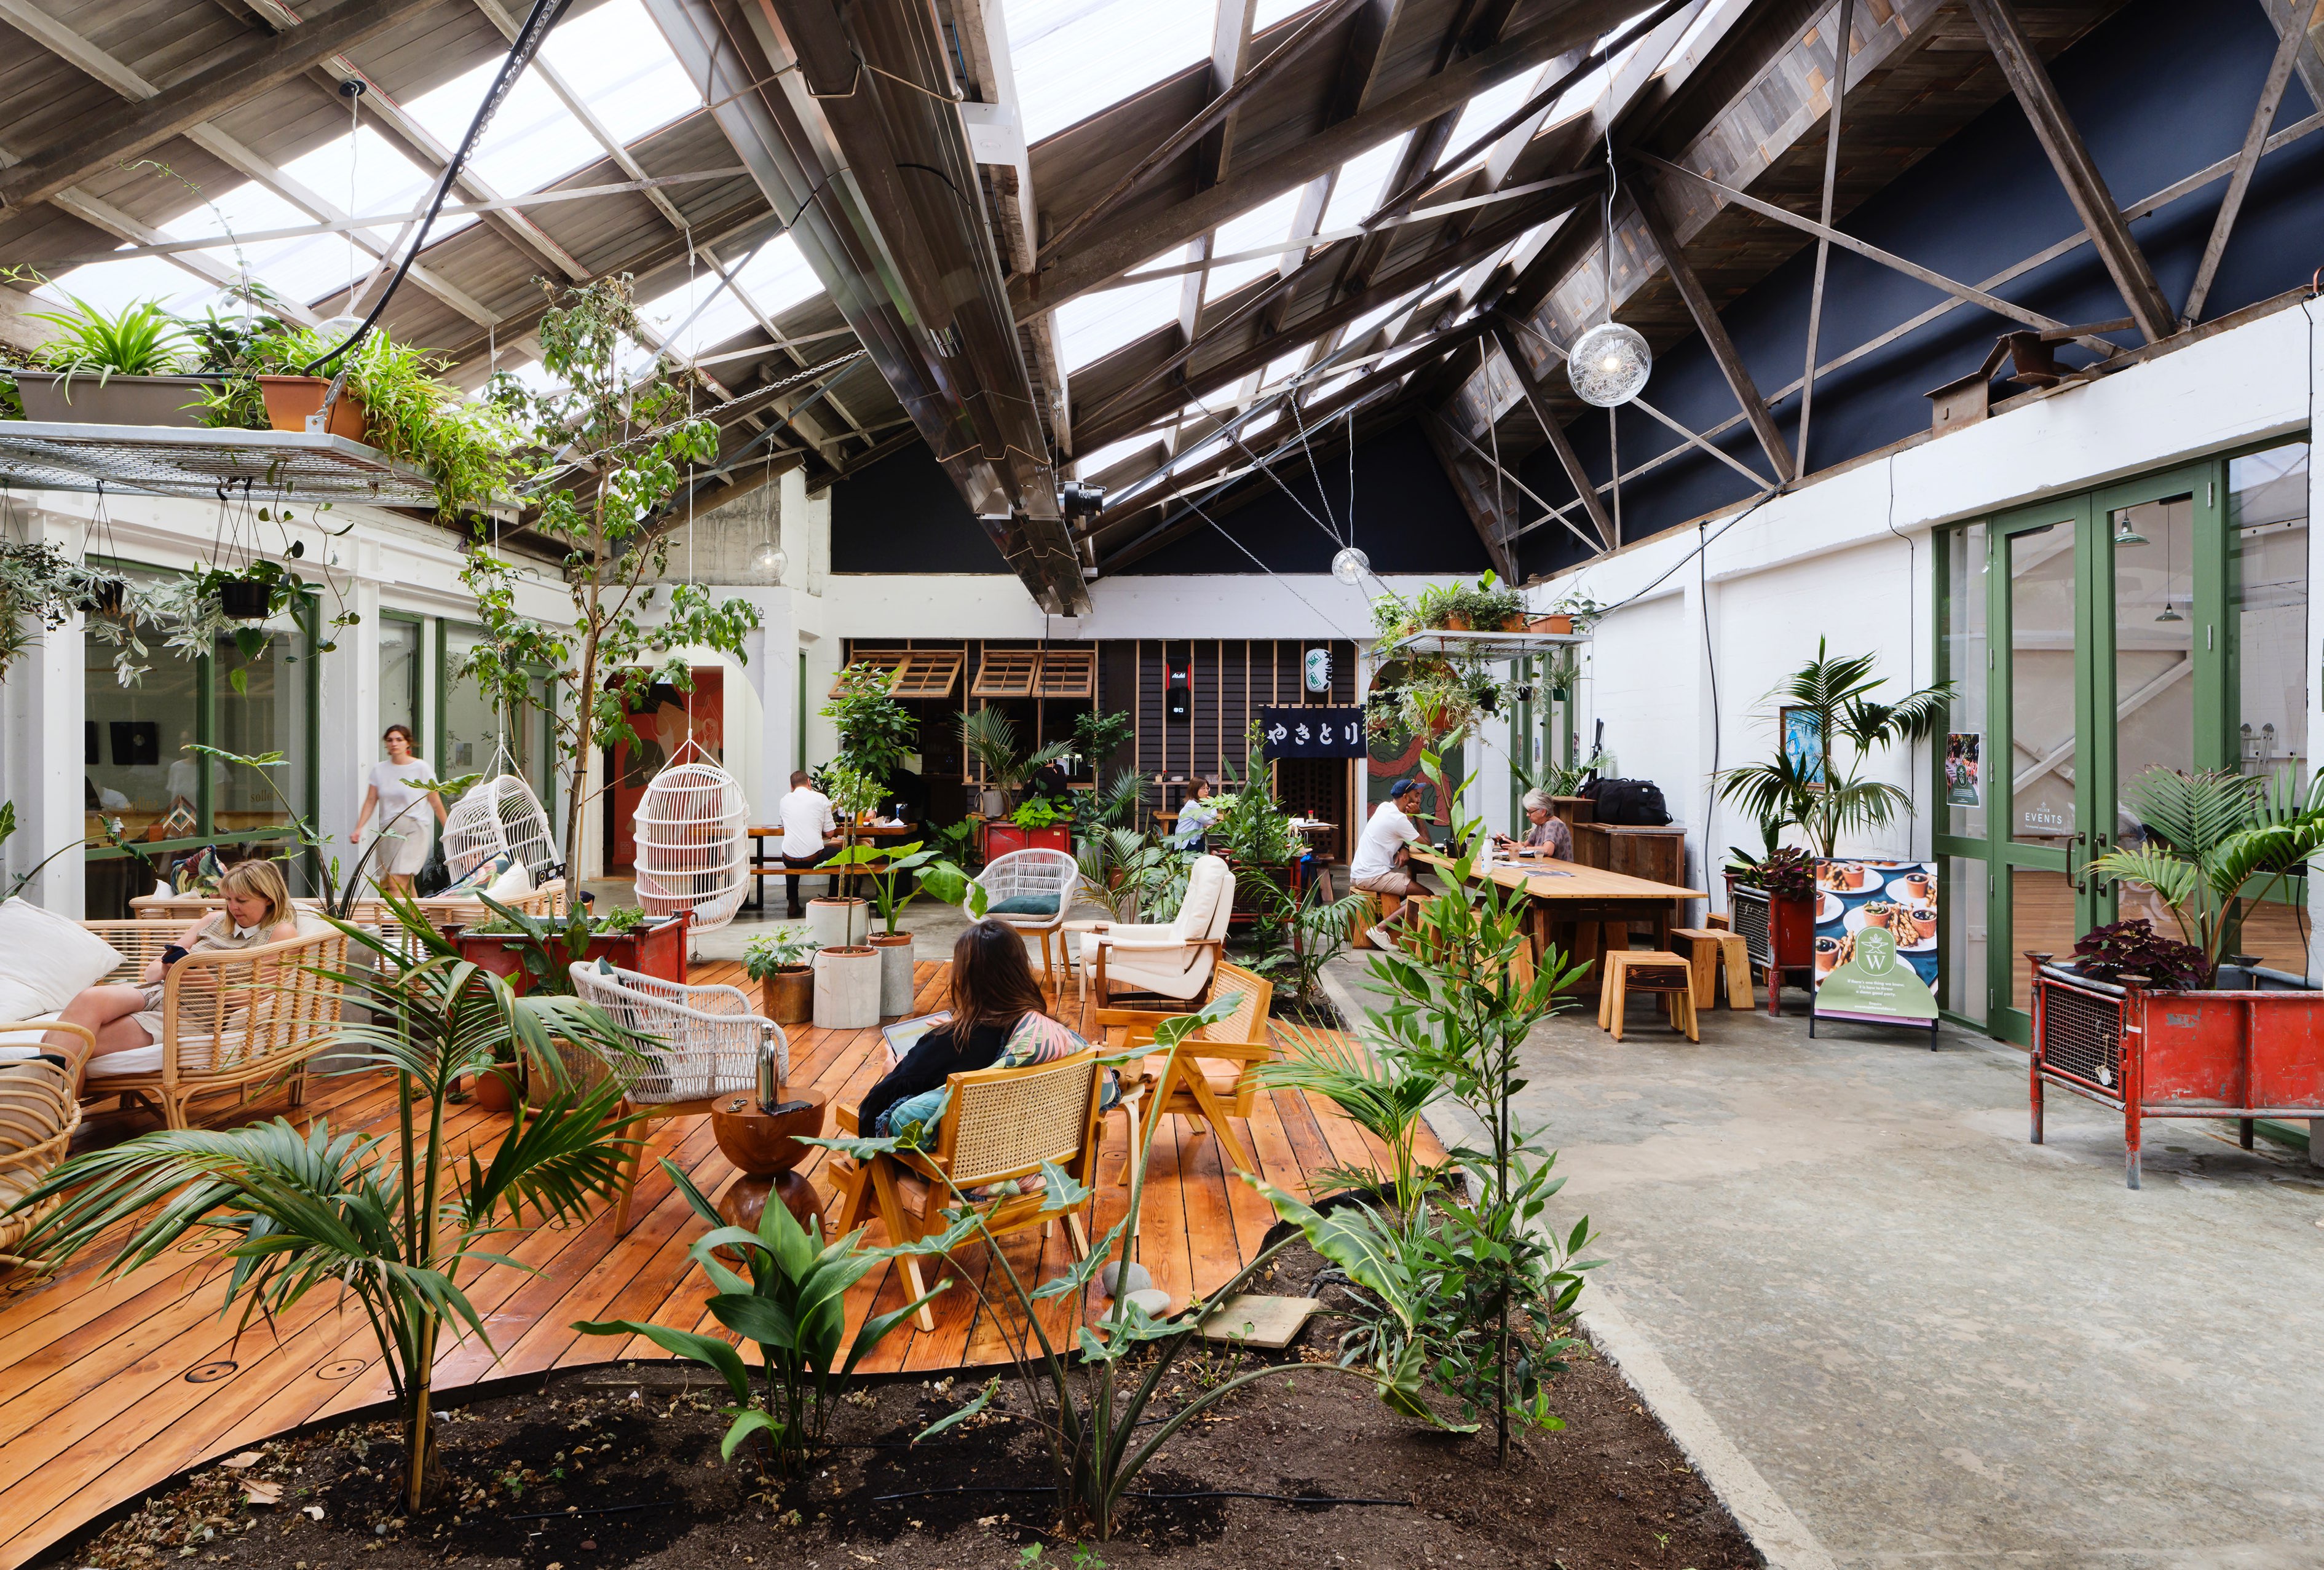 Interior of an open-plan communal space with people sitting amongst interior greenery